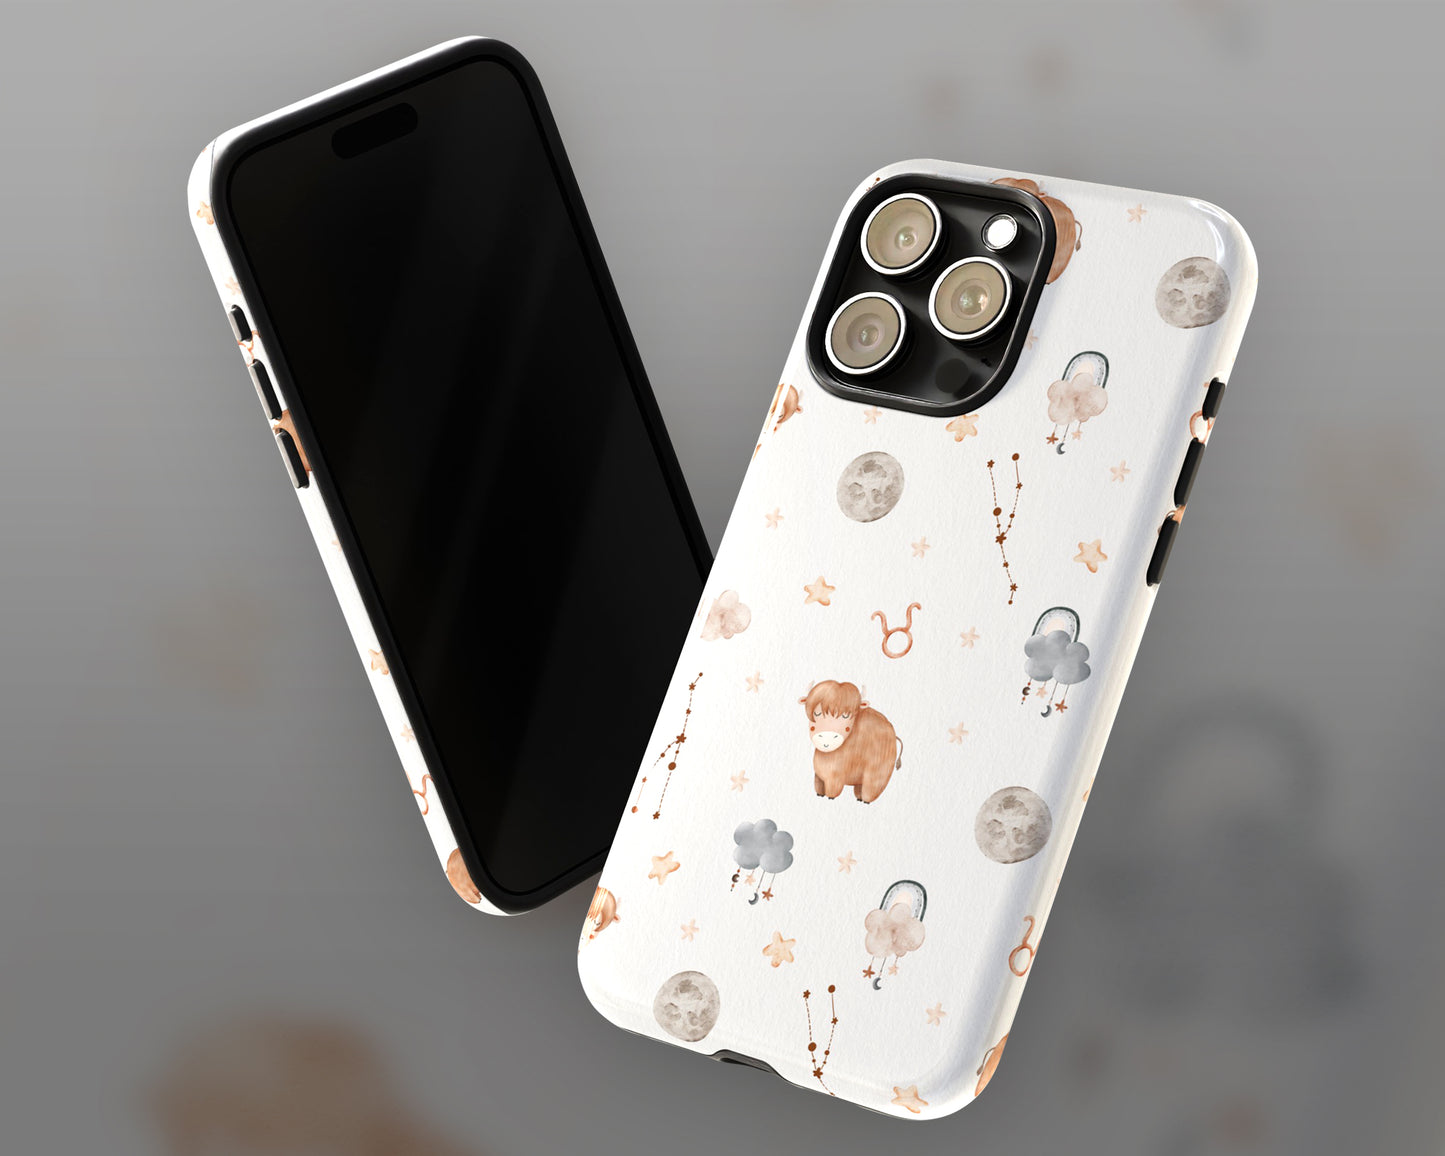 Taurus Zodiac sign watercolor baby pattern iPhone case